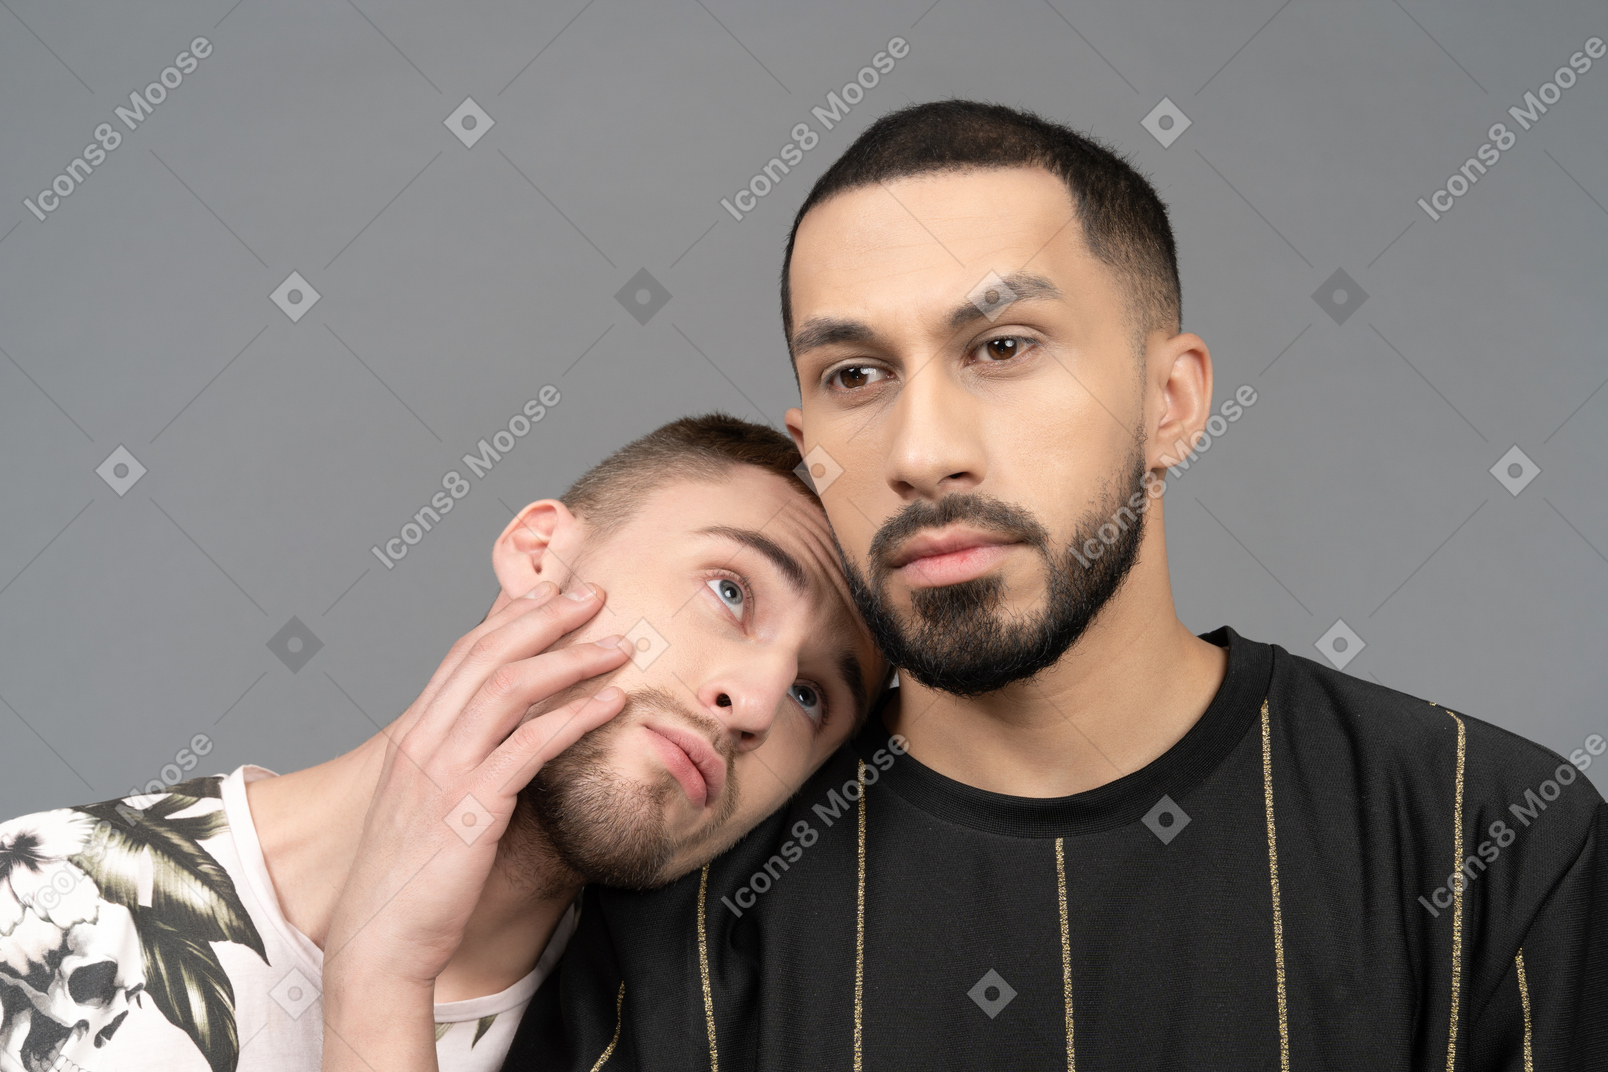 Young man putting his head on boyfriend's shoulder